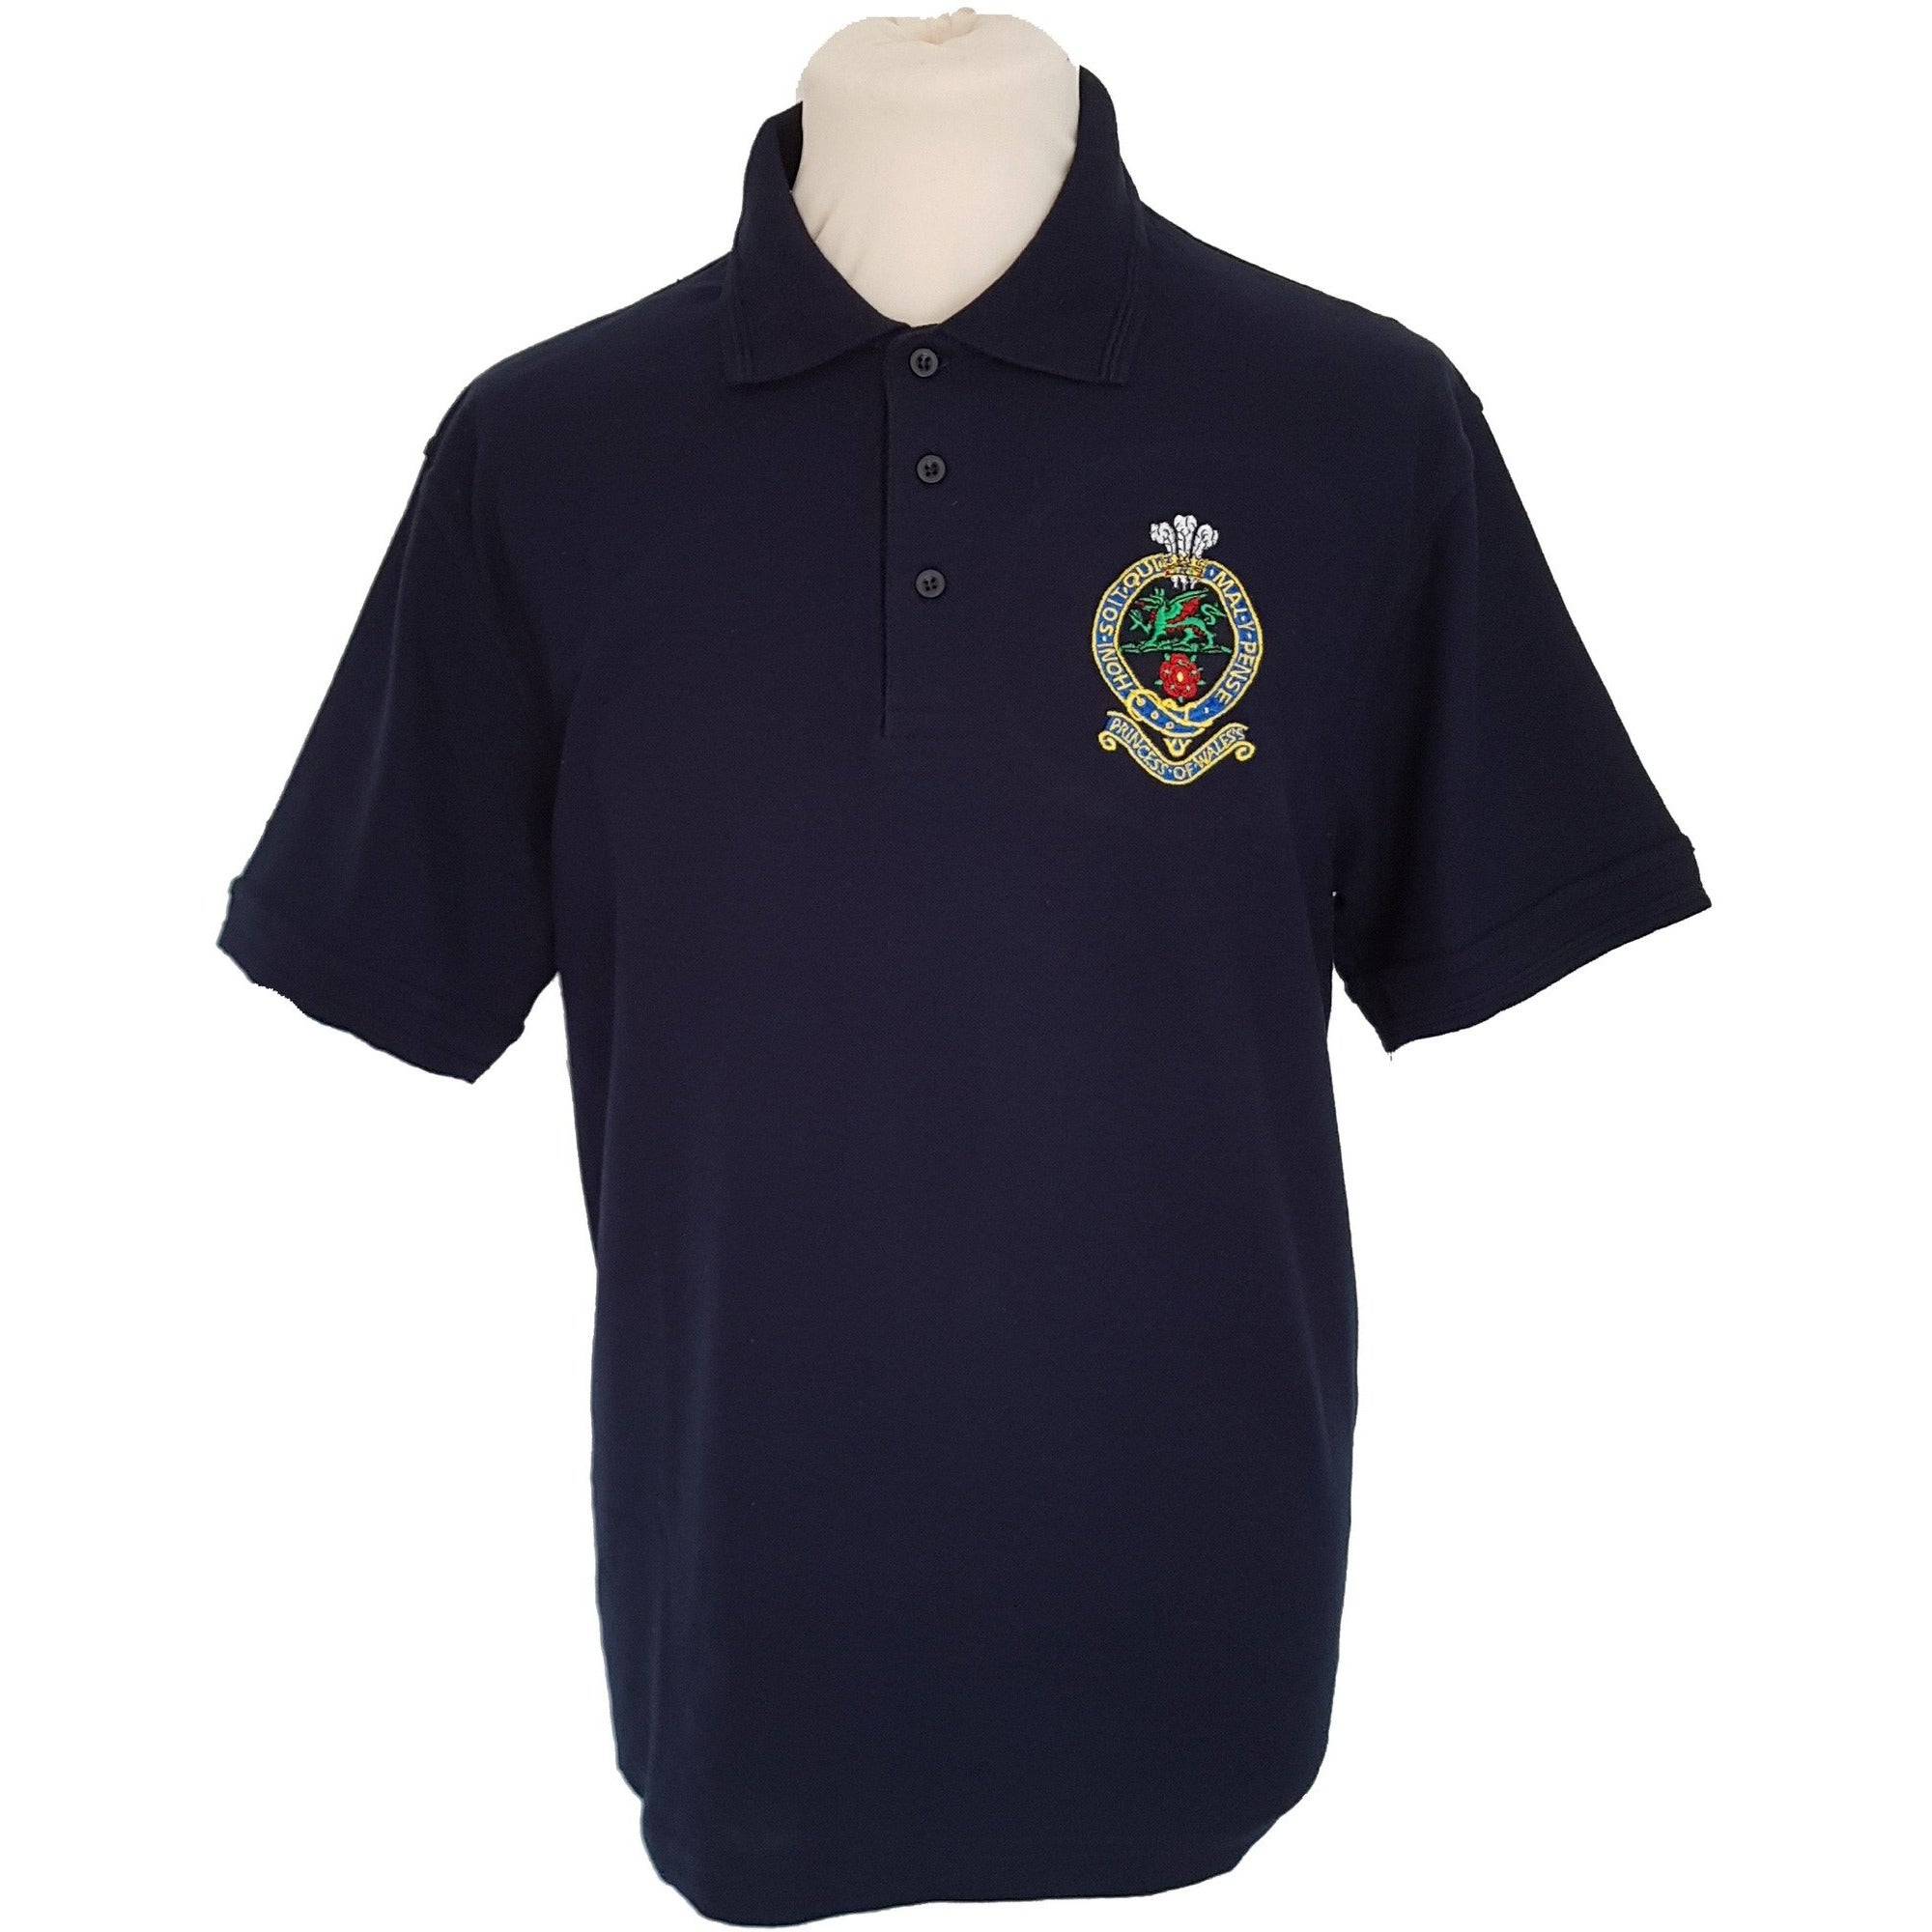 Navy Polo Shirt - Embroidered PWRR Cap Badge | Ammo & Company | PWRR ...